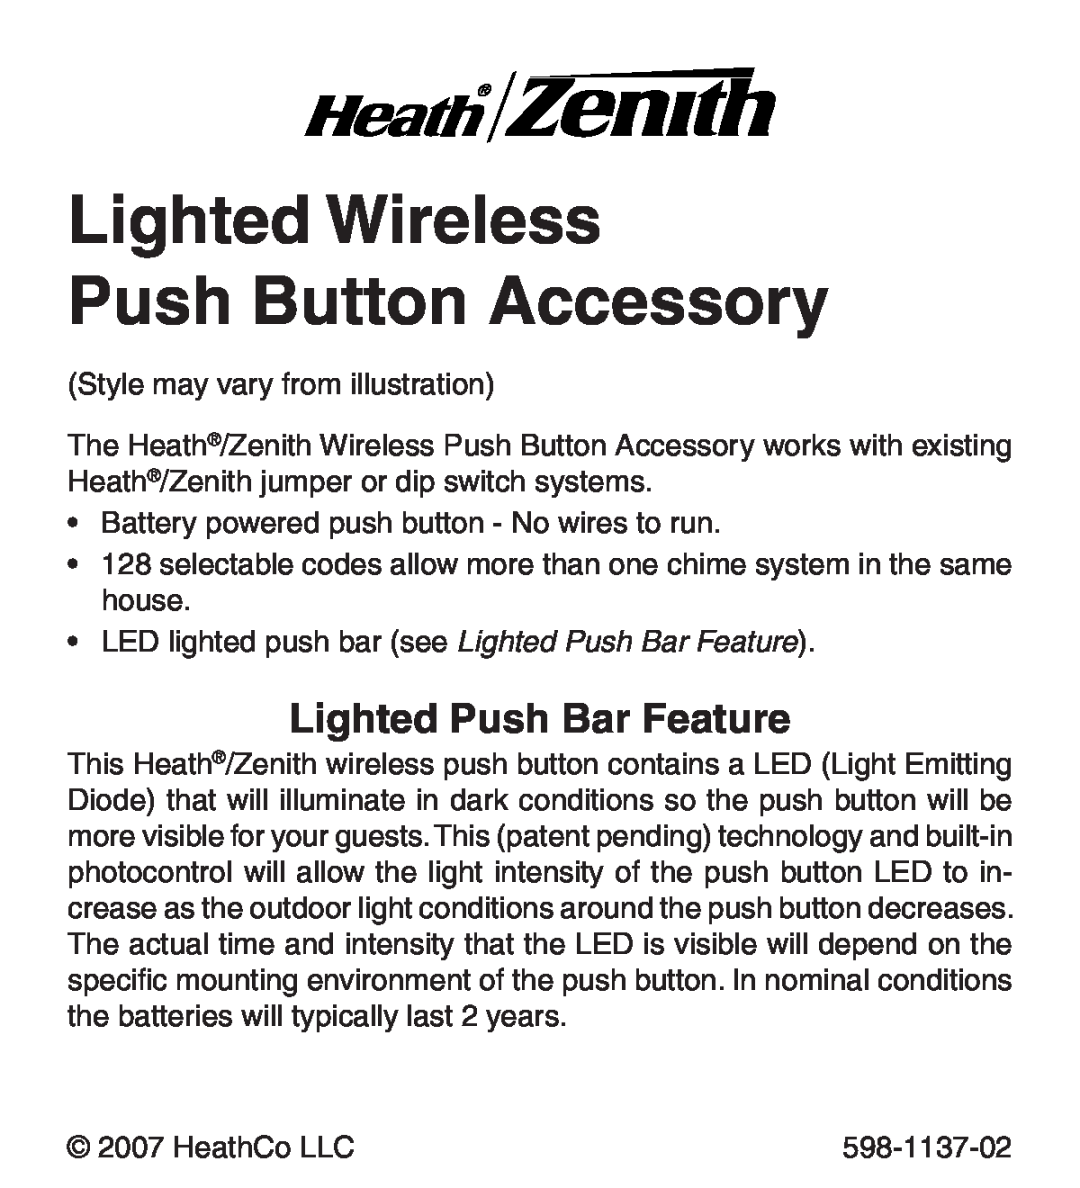 Heath Zenith Lighted Wireless Push Button Accessory manual Lighted Push Bar Feature 